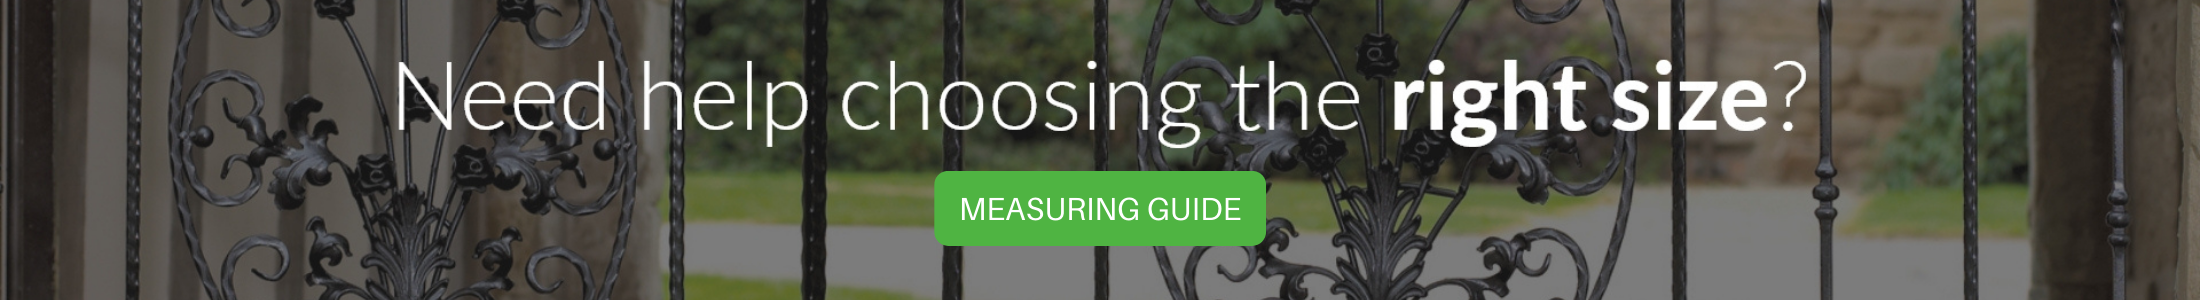 Take a look at the measuring guide for help with sizes